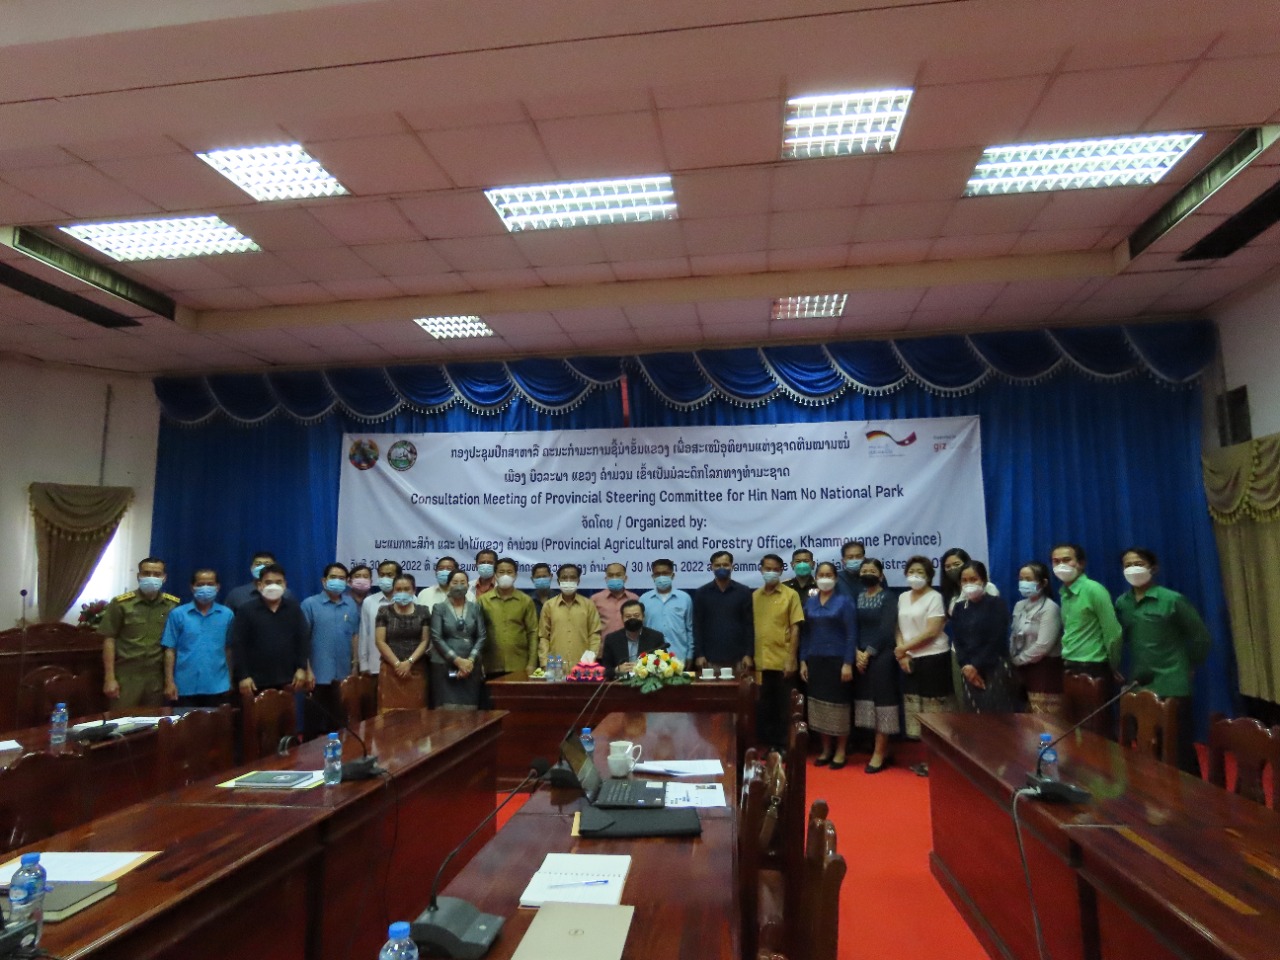 Hin Nam No Provincial Steering Committee took place in Khammouane to discuss the implementation of Hin Nam No National Park management and the progress of nomination processes.